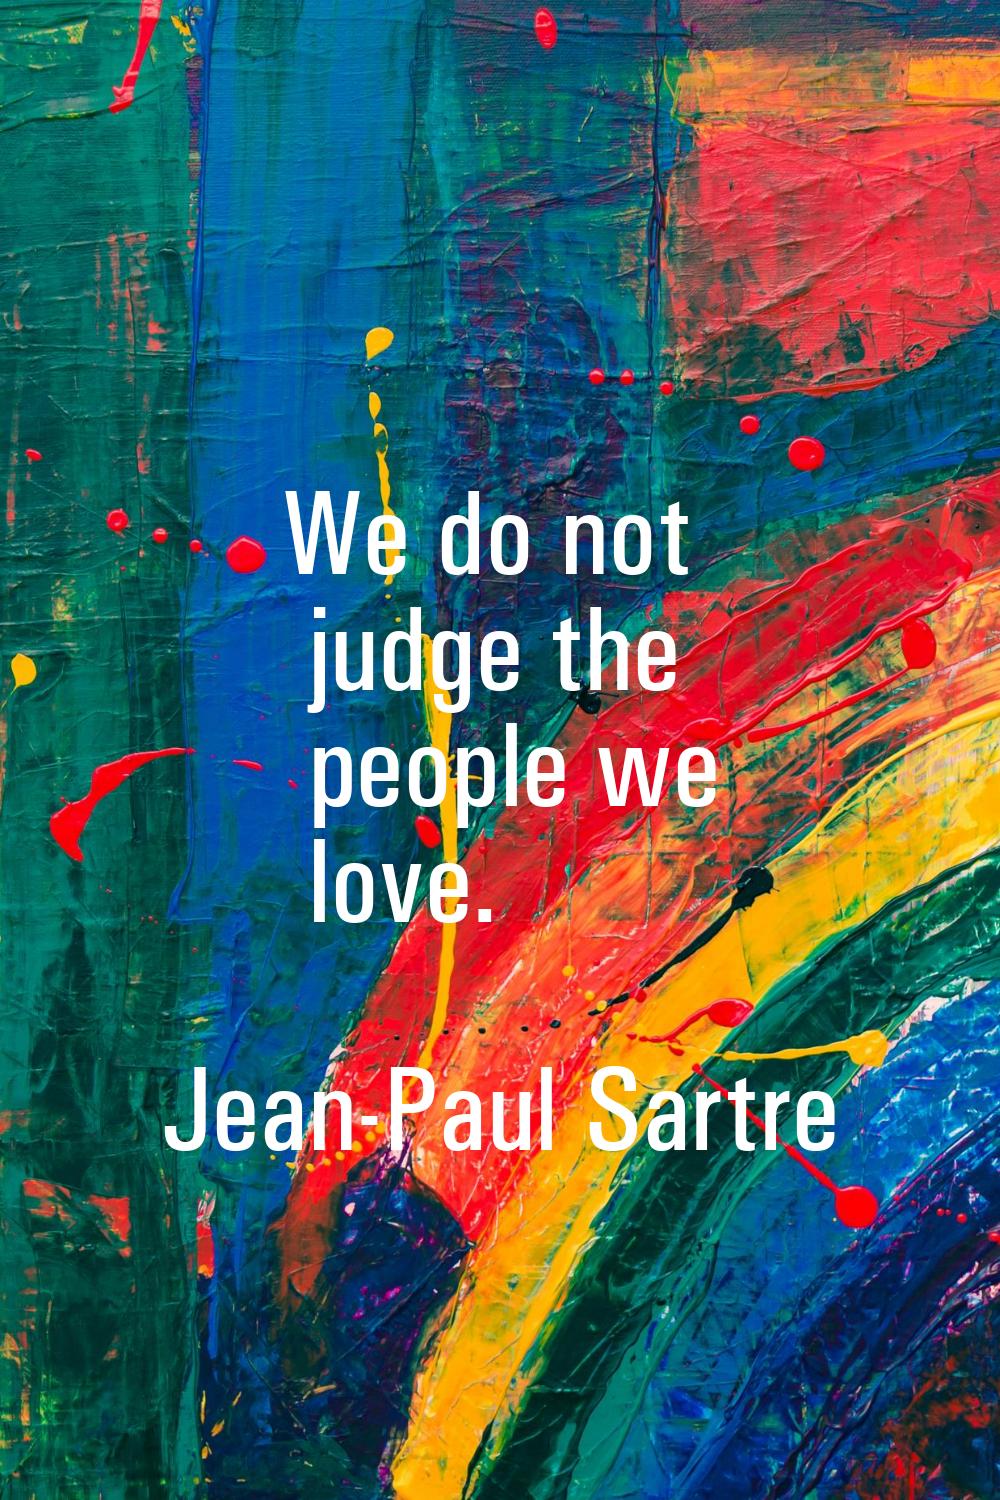 We do not judge the people we love.